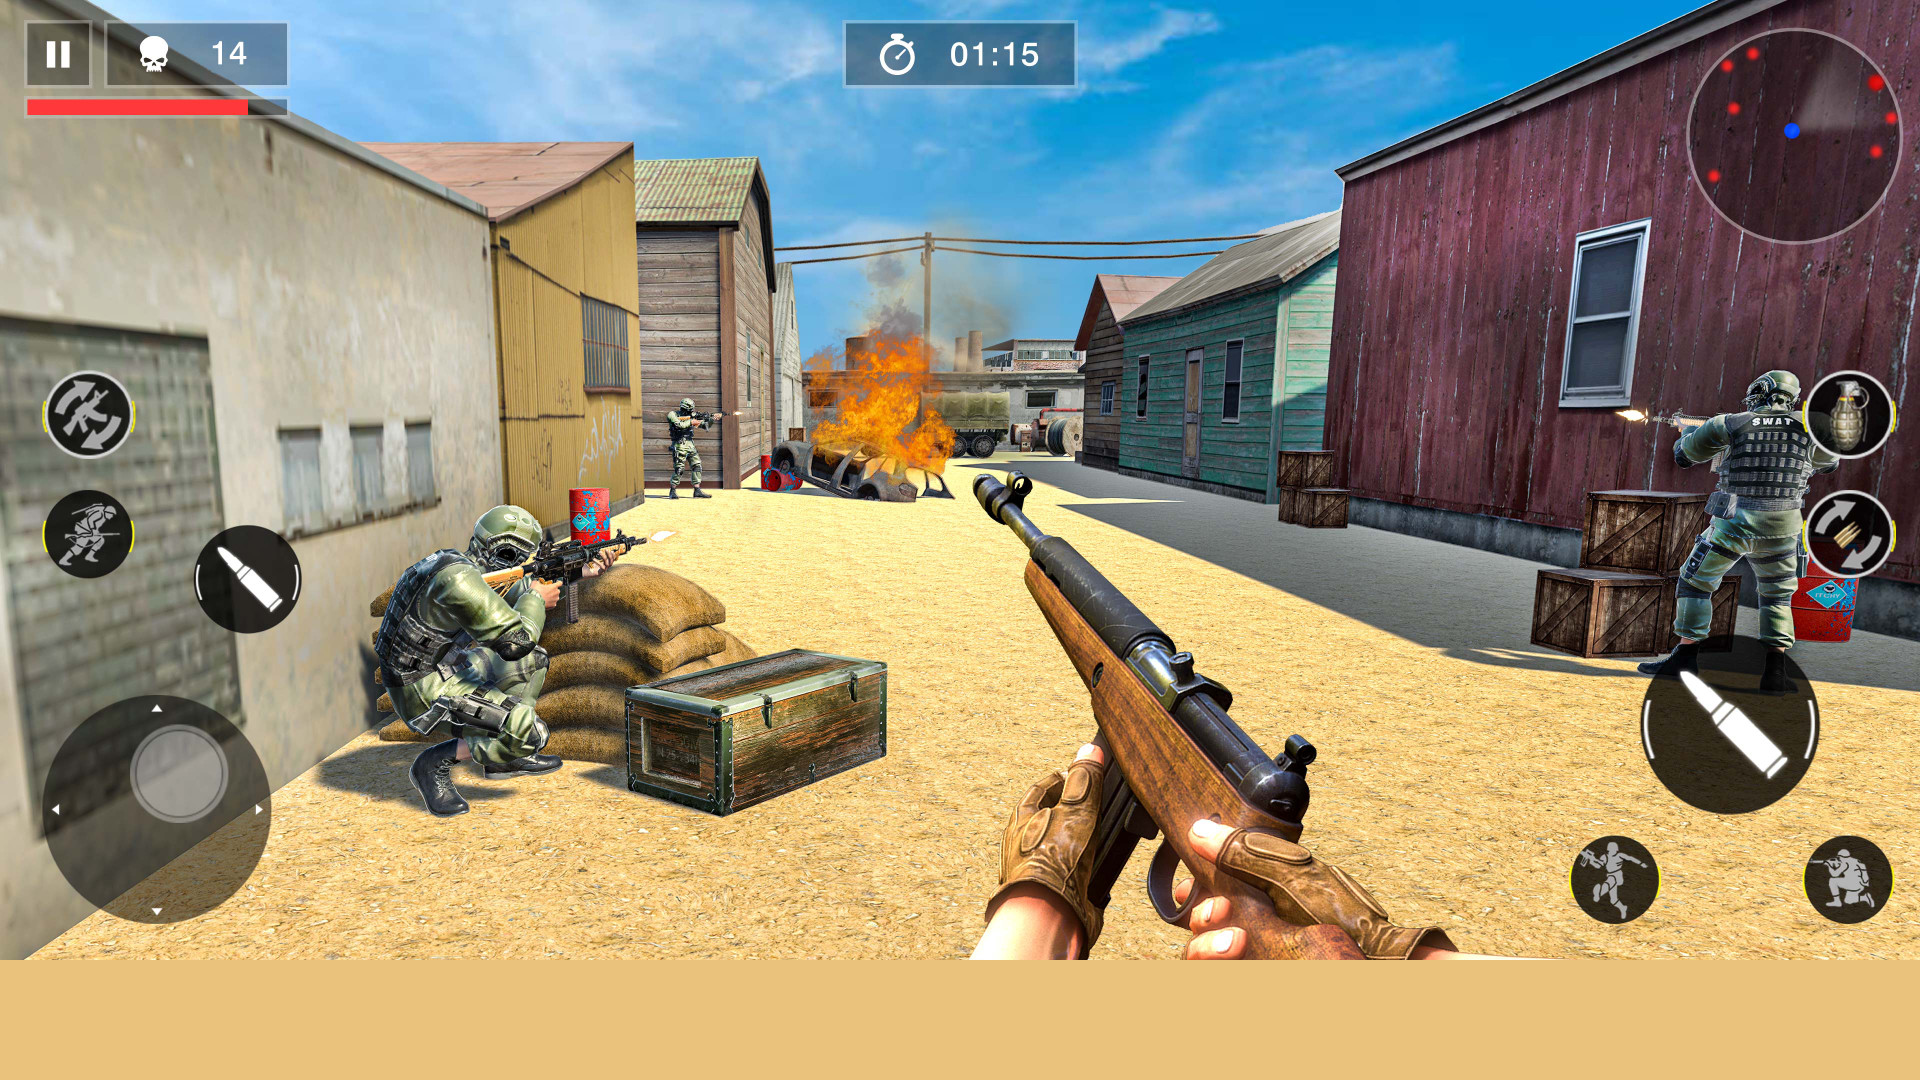 Download Critical Strike FPS Games 2020 android on PC